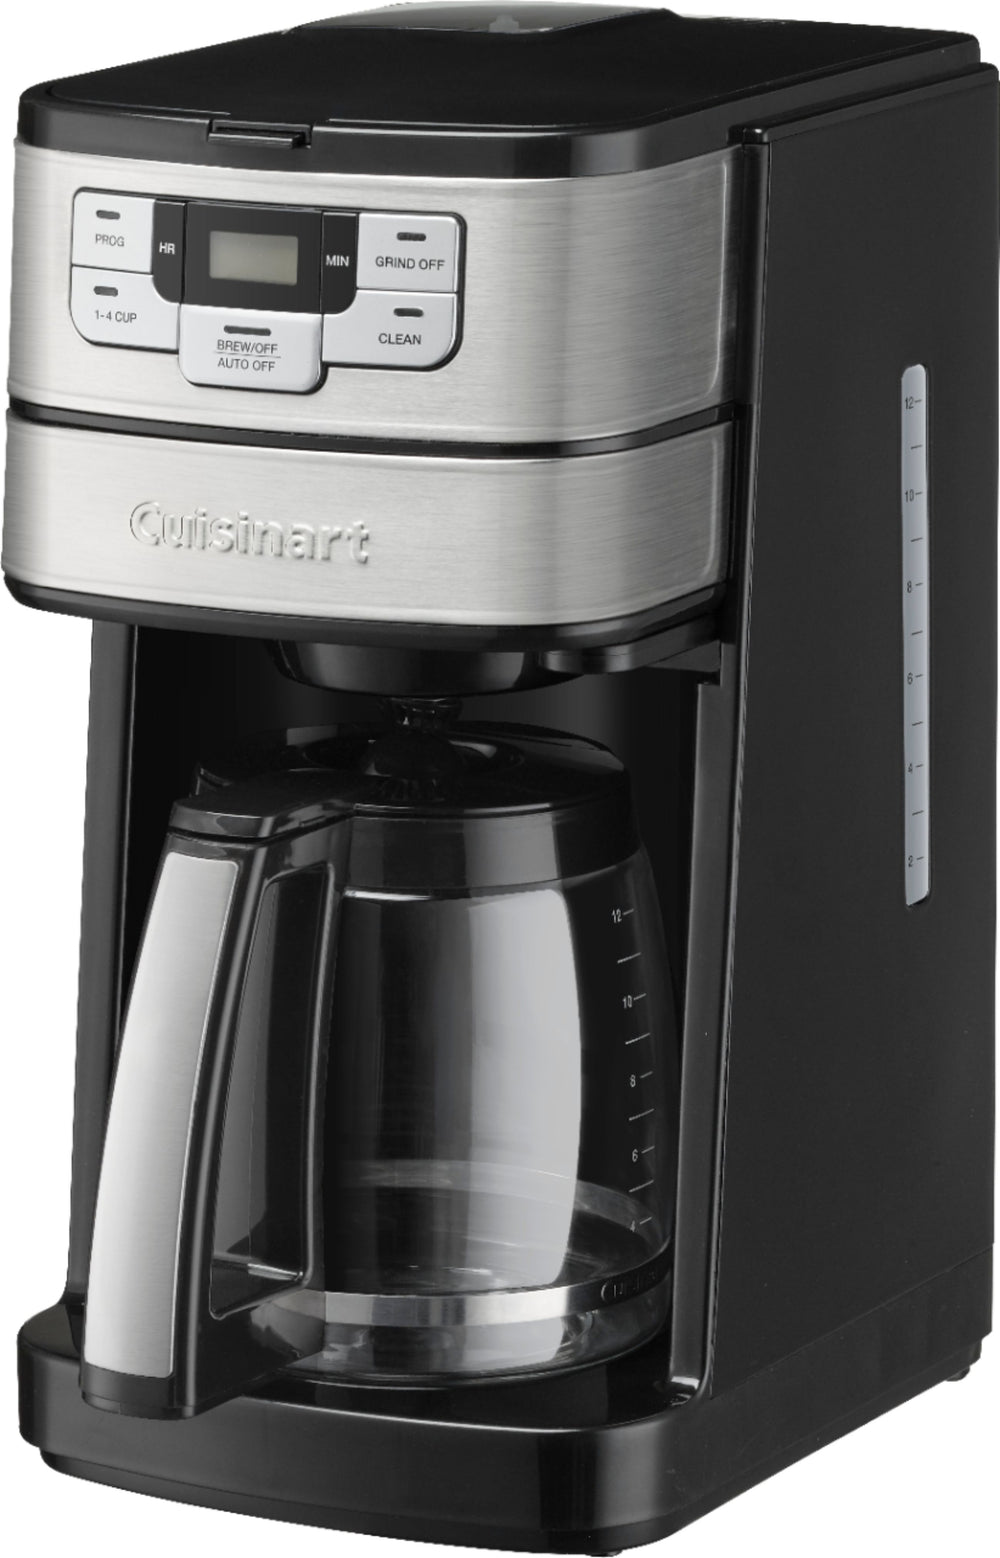 Cuisinart - 12 Cup Coffeemaker - Black/Stainless_1